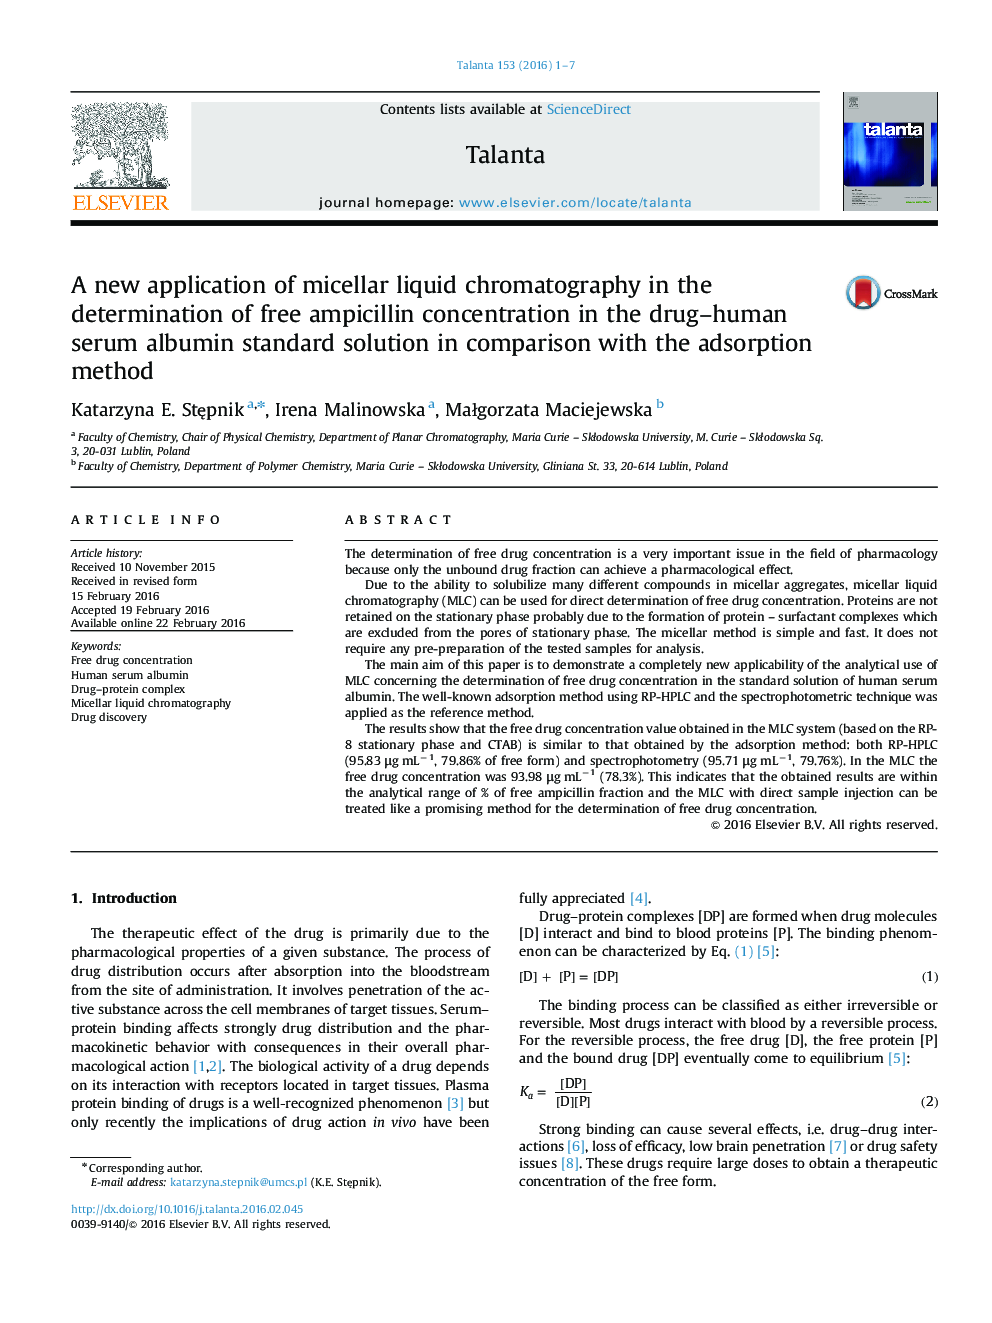 A new application of micellar liquid chromatography in the determination of free ampicillin concentration in the drug–human serum albumin standard solution in comparison with the adsorption method